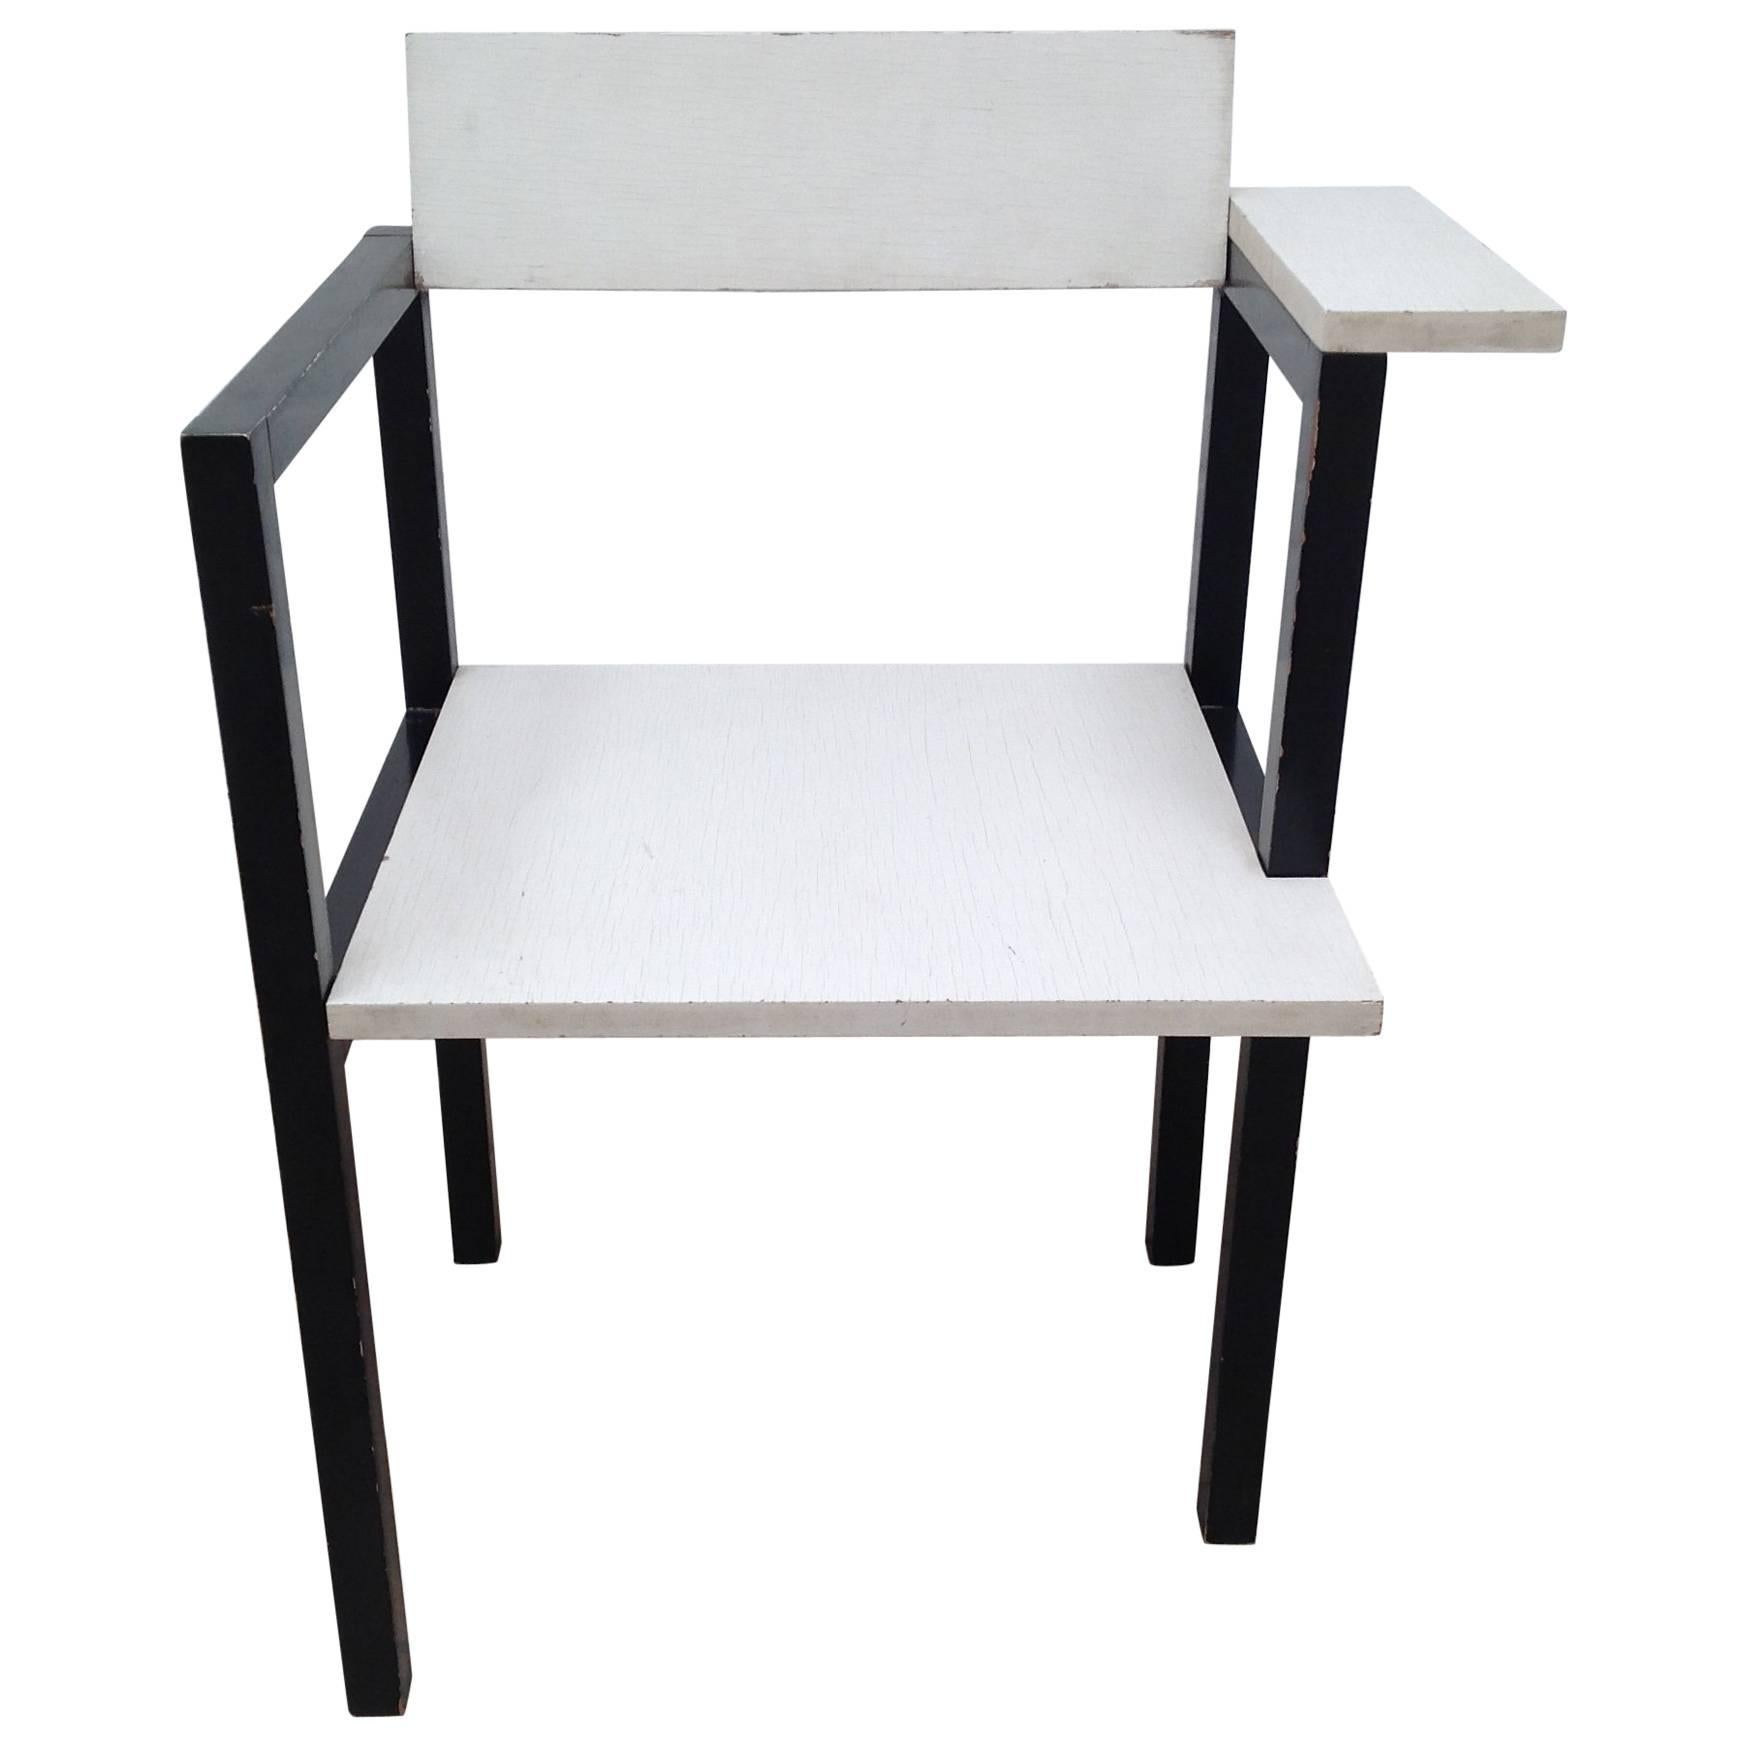 Very Rare and Unknown One-Off Chair by Gerrit Rietveld For Sale